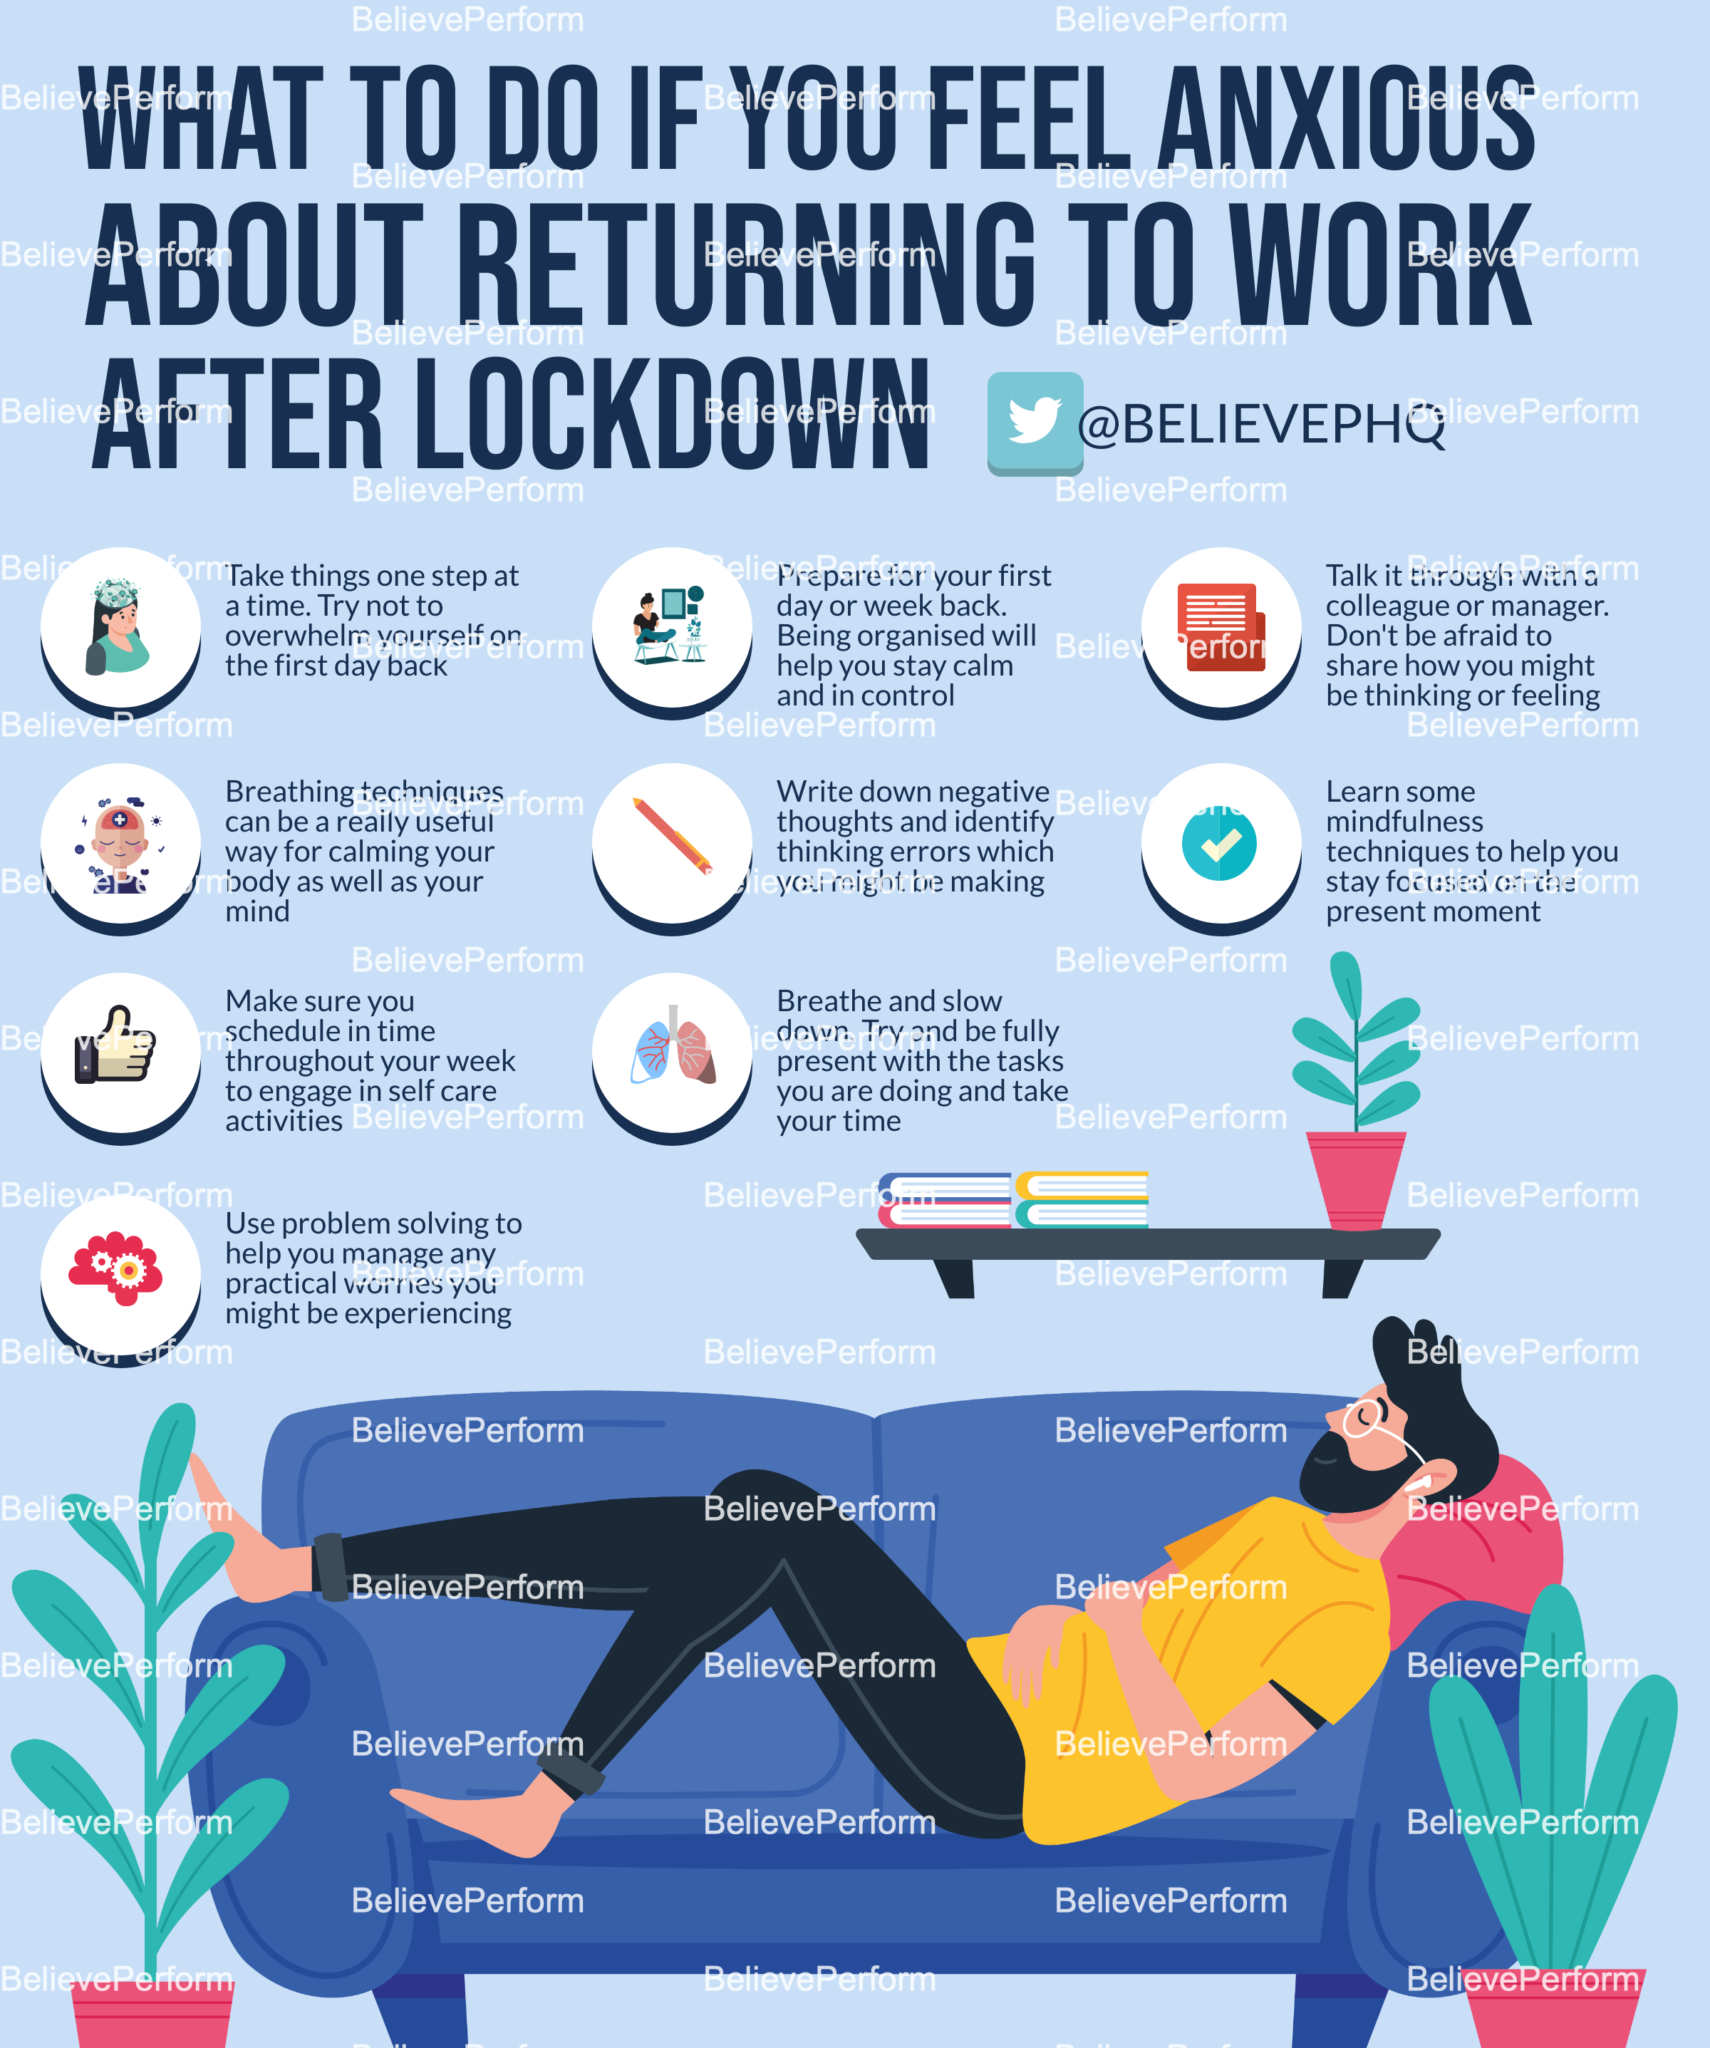 what-to-do-if-you-feel-anxious-about-returning-to-work-after-lockdown